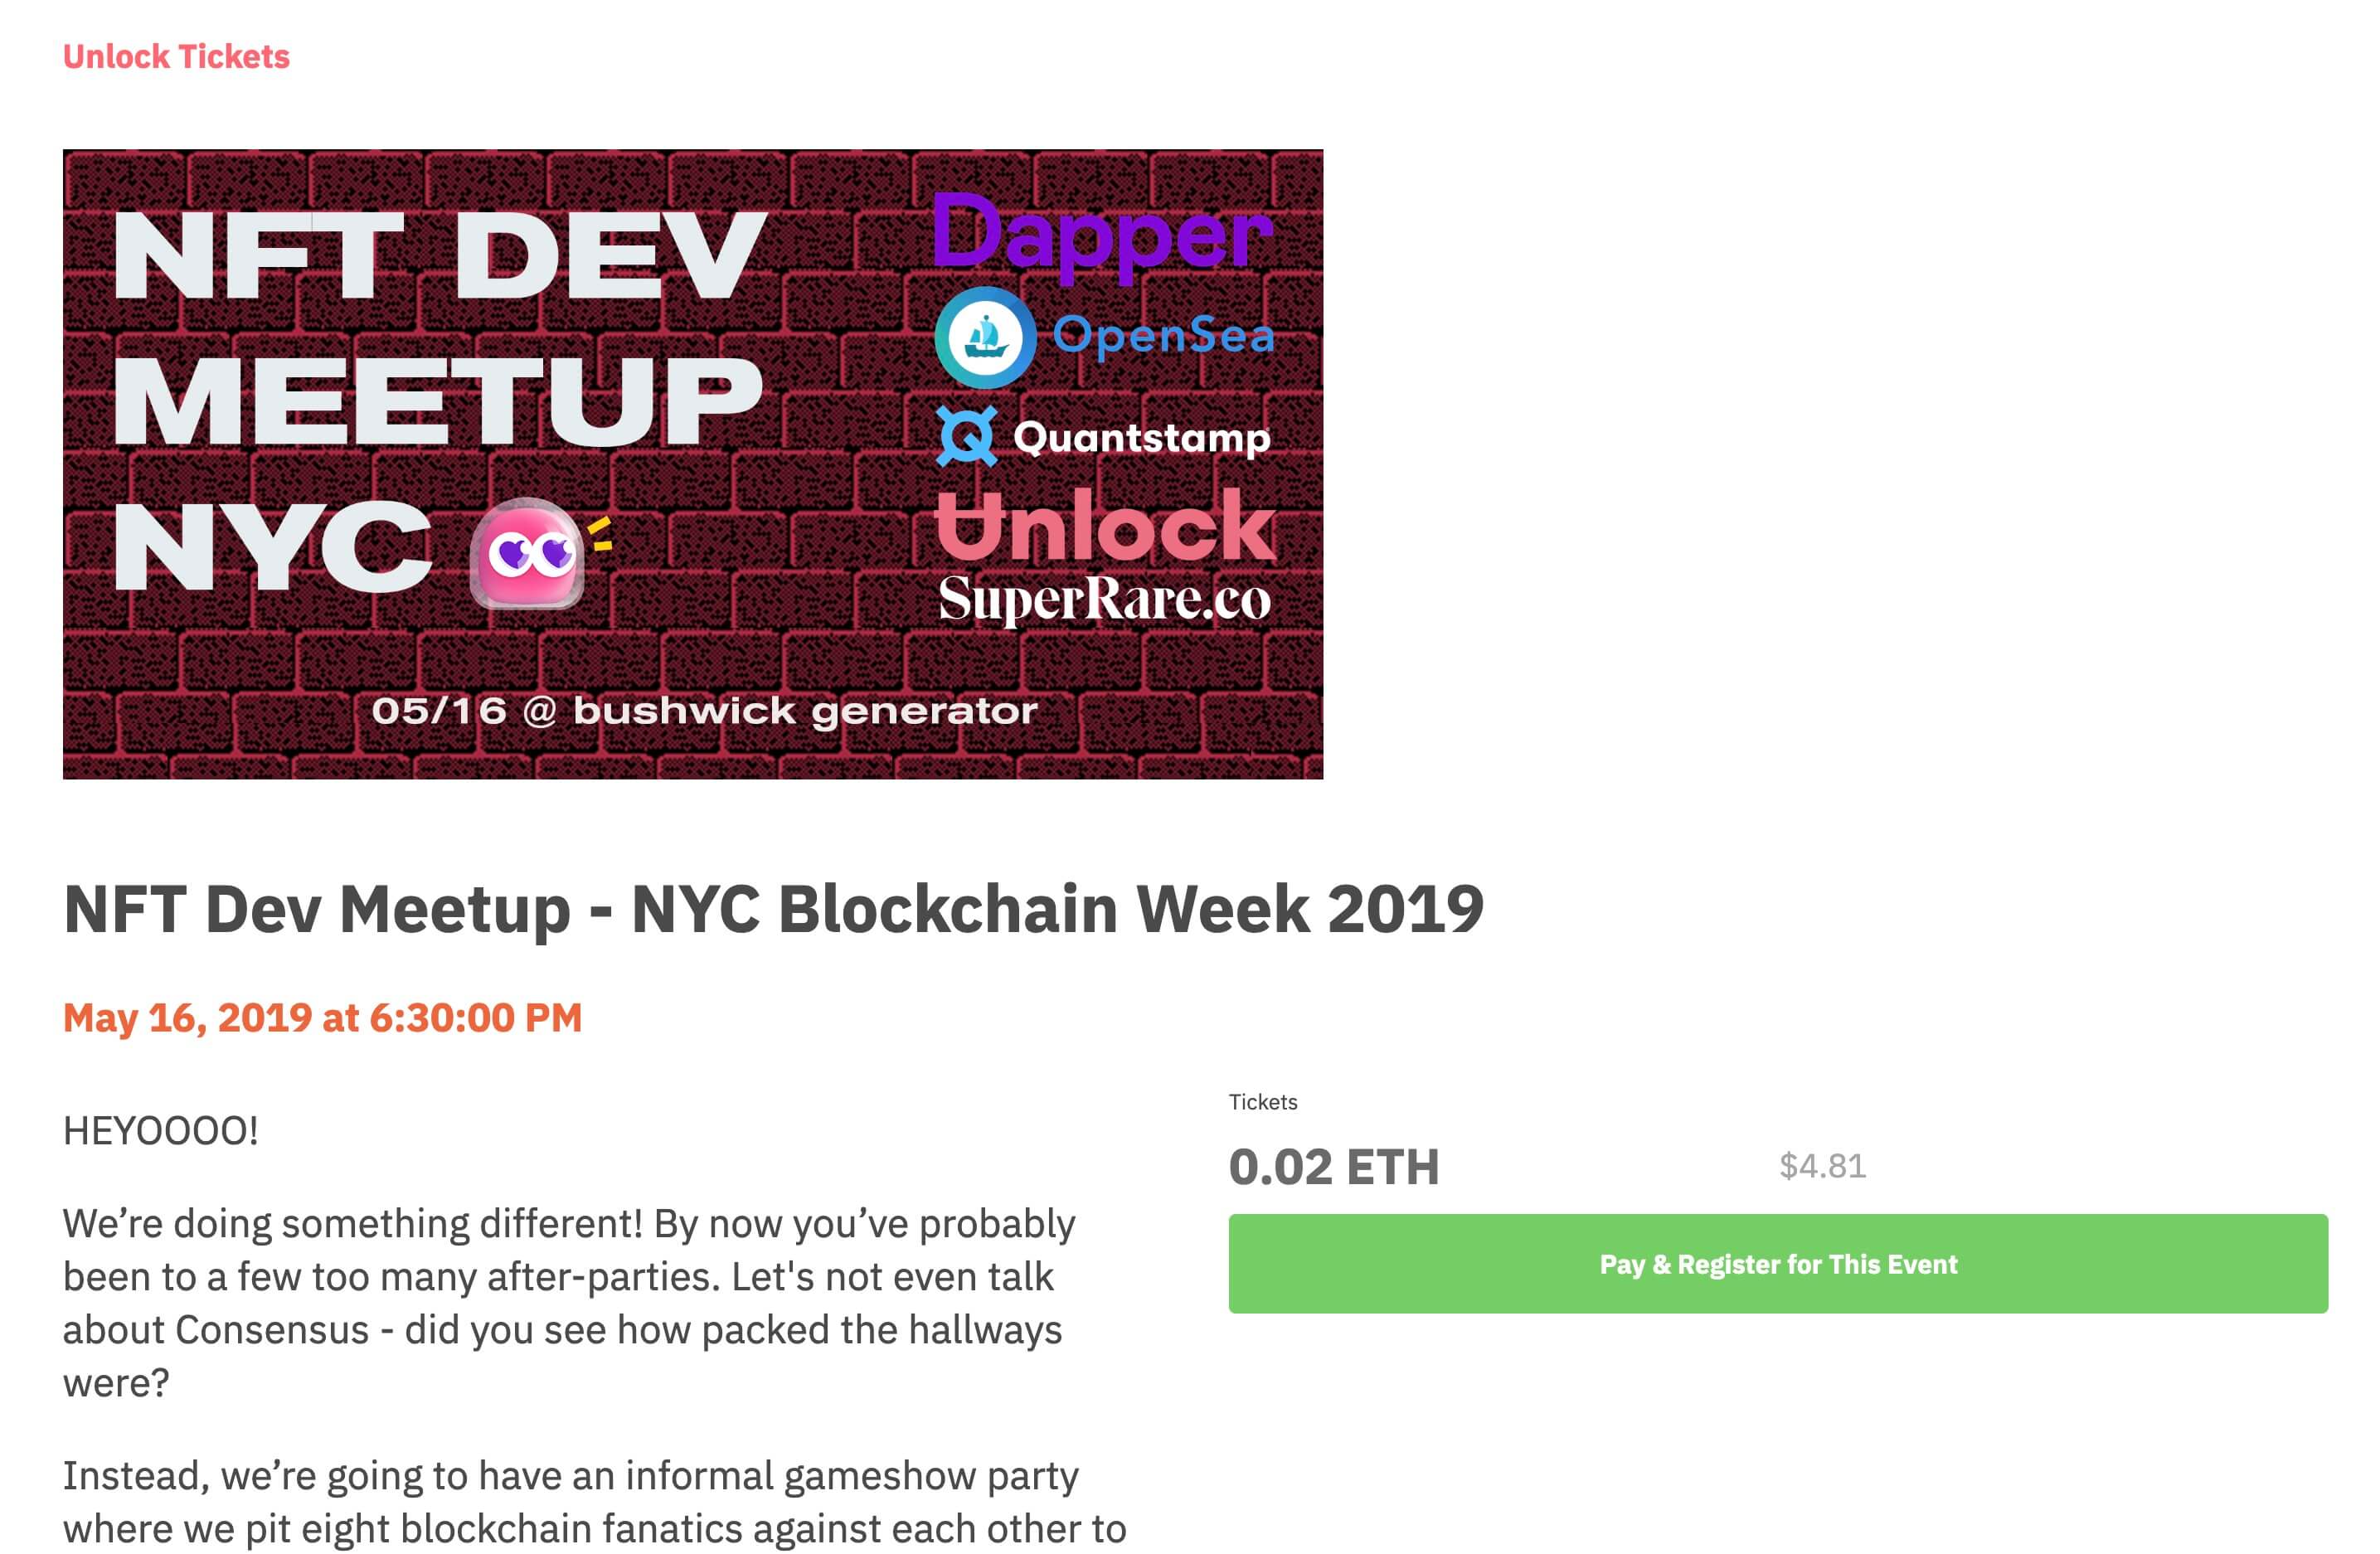 The NFT Dev Meetup ticket page.